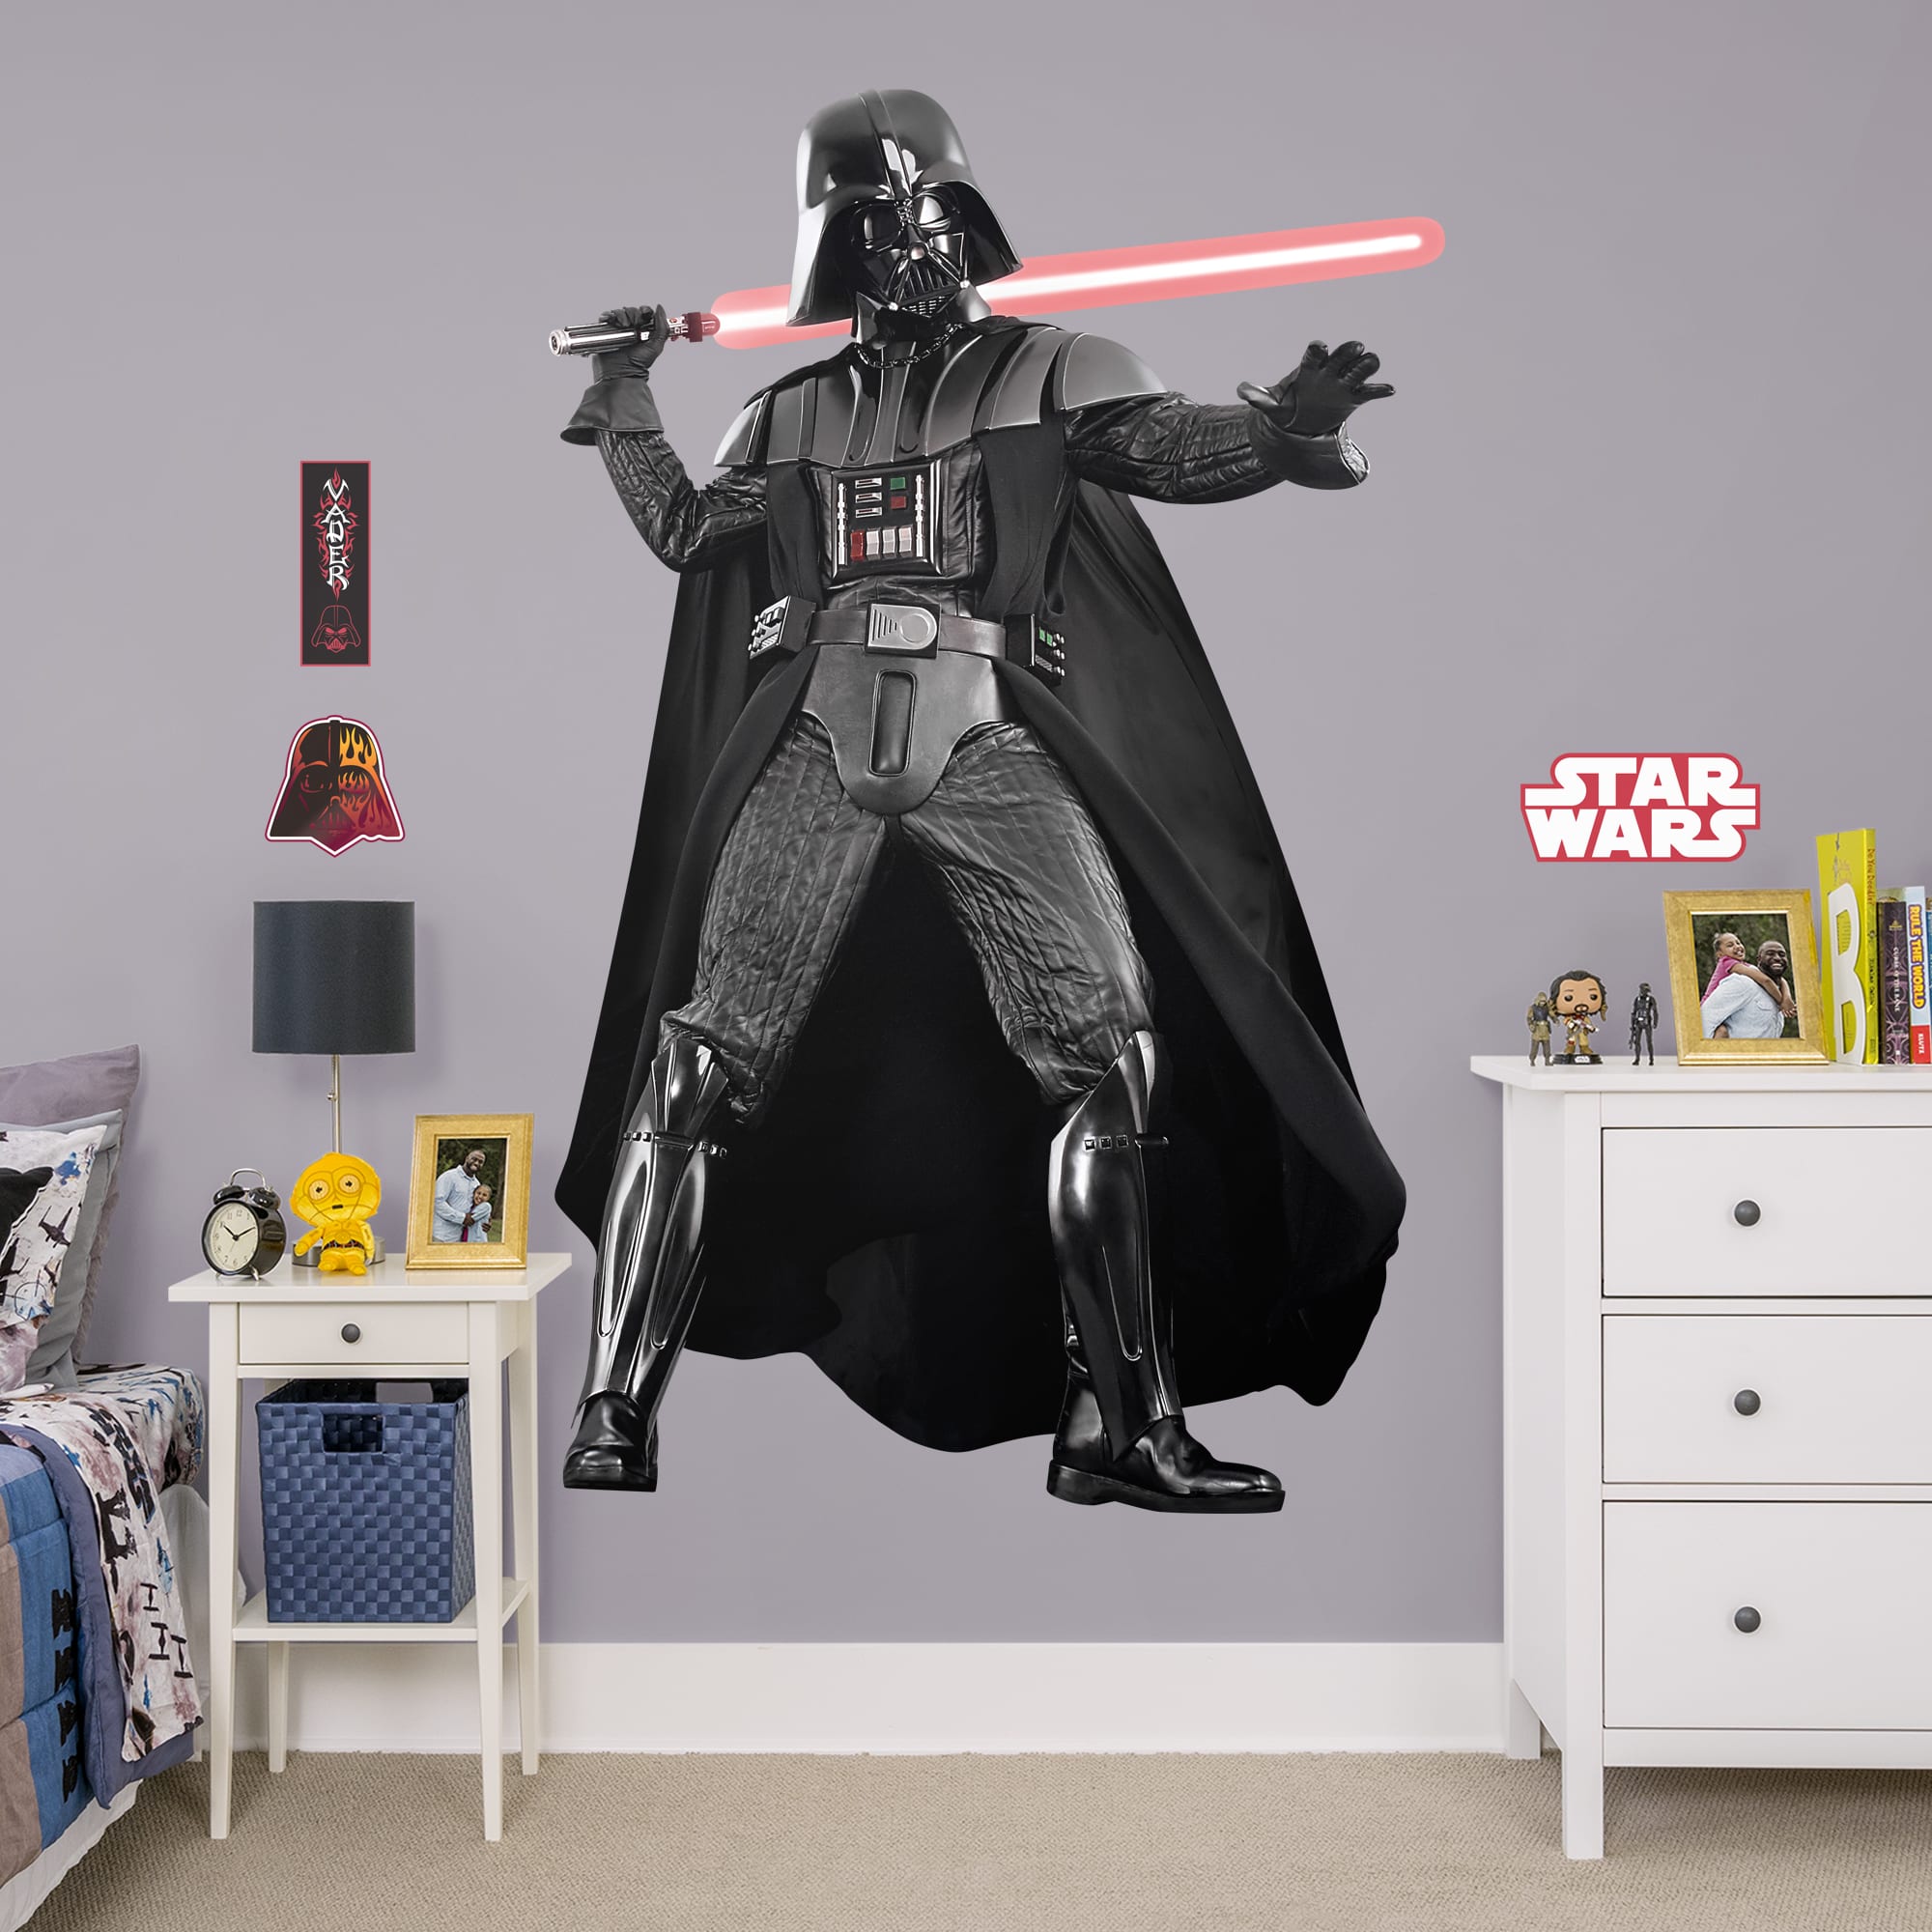 Darth Vader - Officially Licensed Removable Wall Decal Life-Size Character + 3 Decals (49"W x 77"H) by Fathead | Vinyl